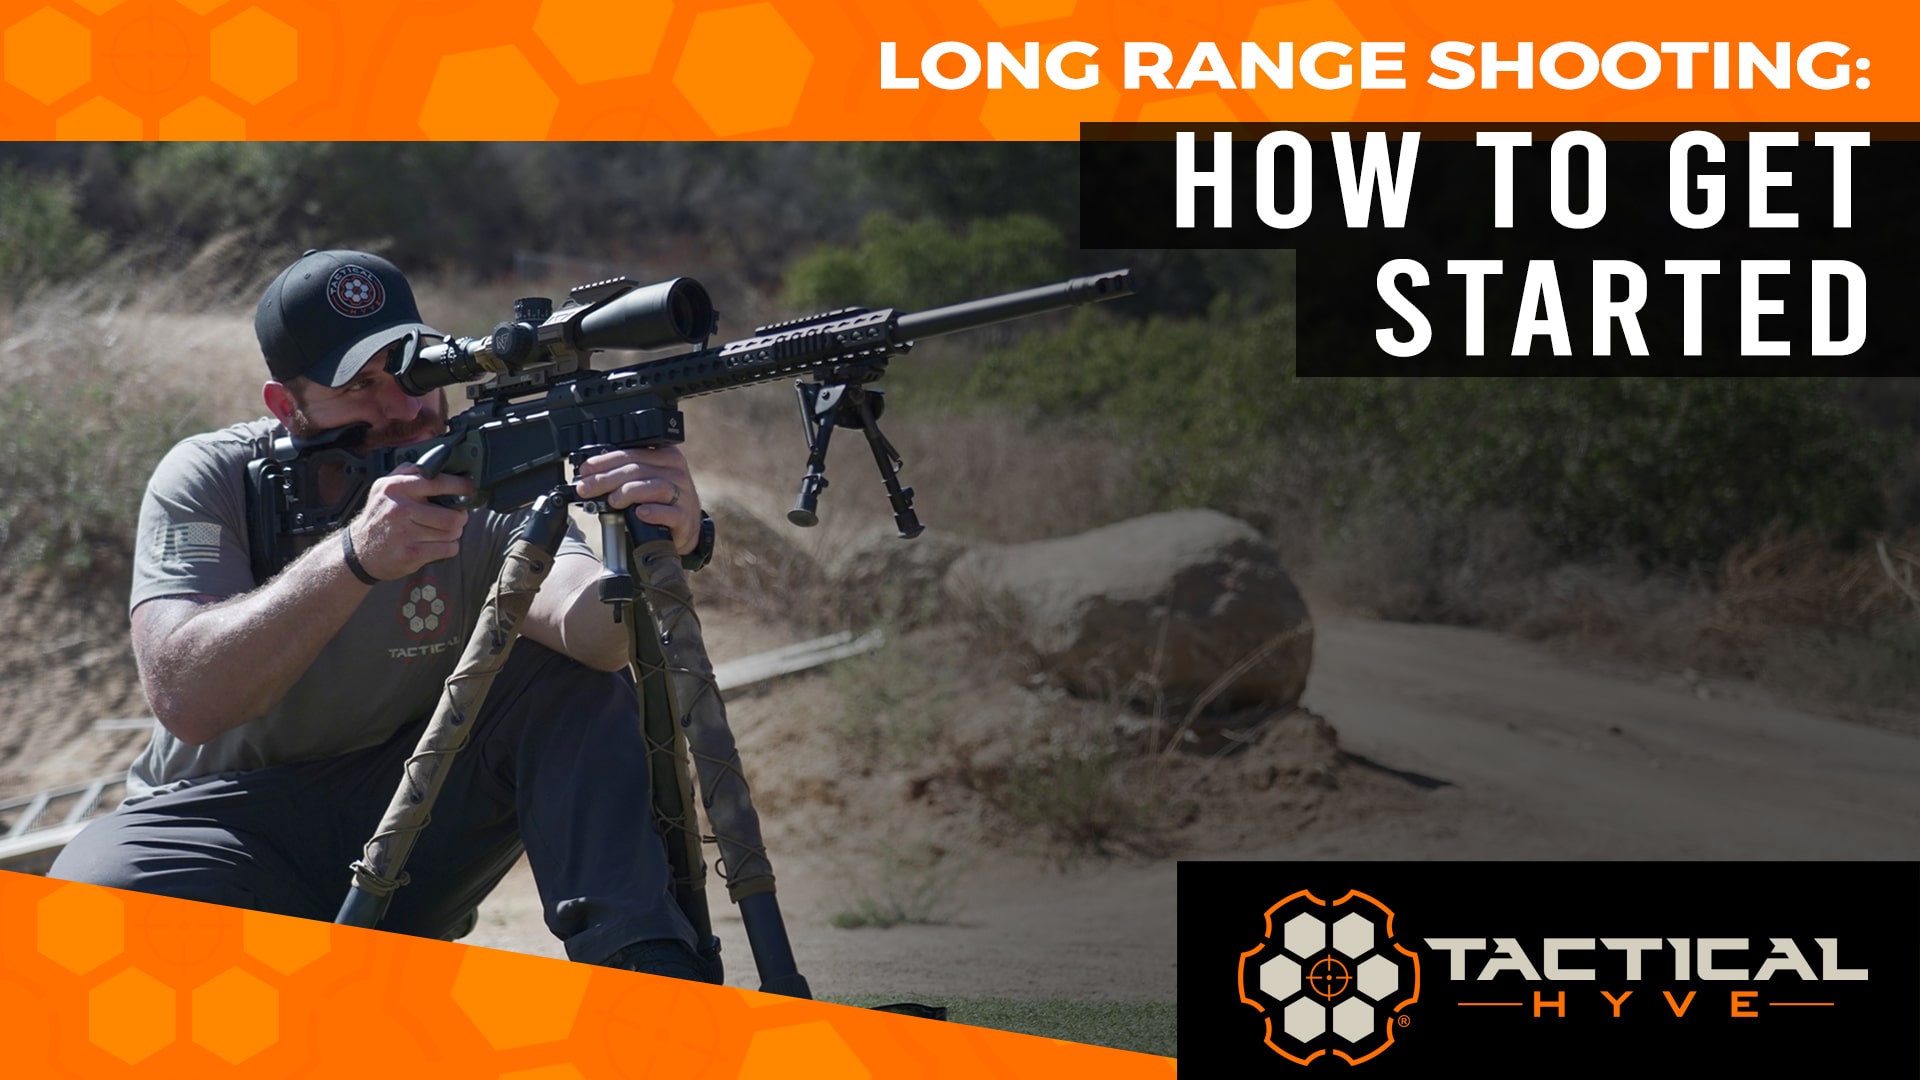 Long range shooting: how to get started